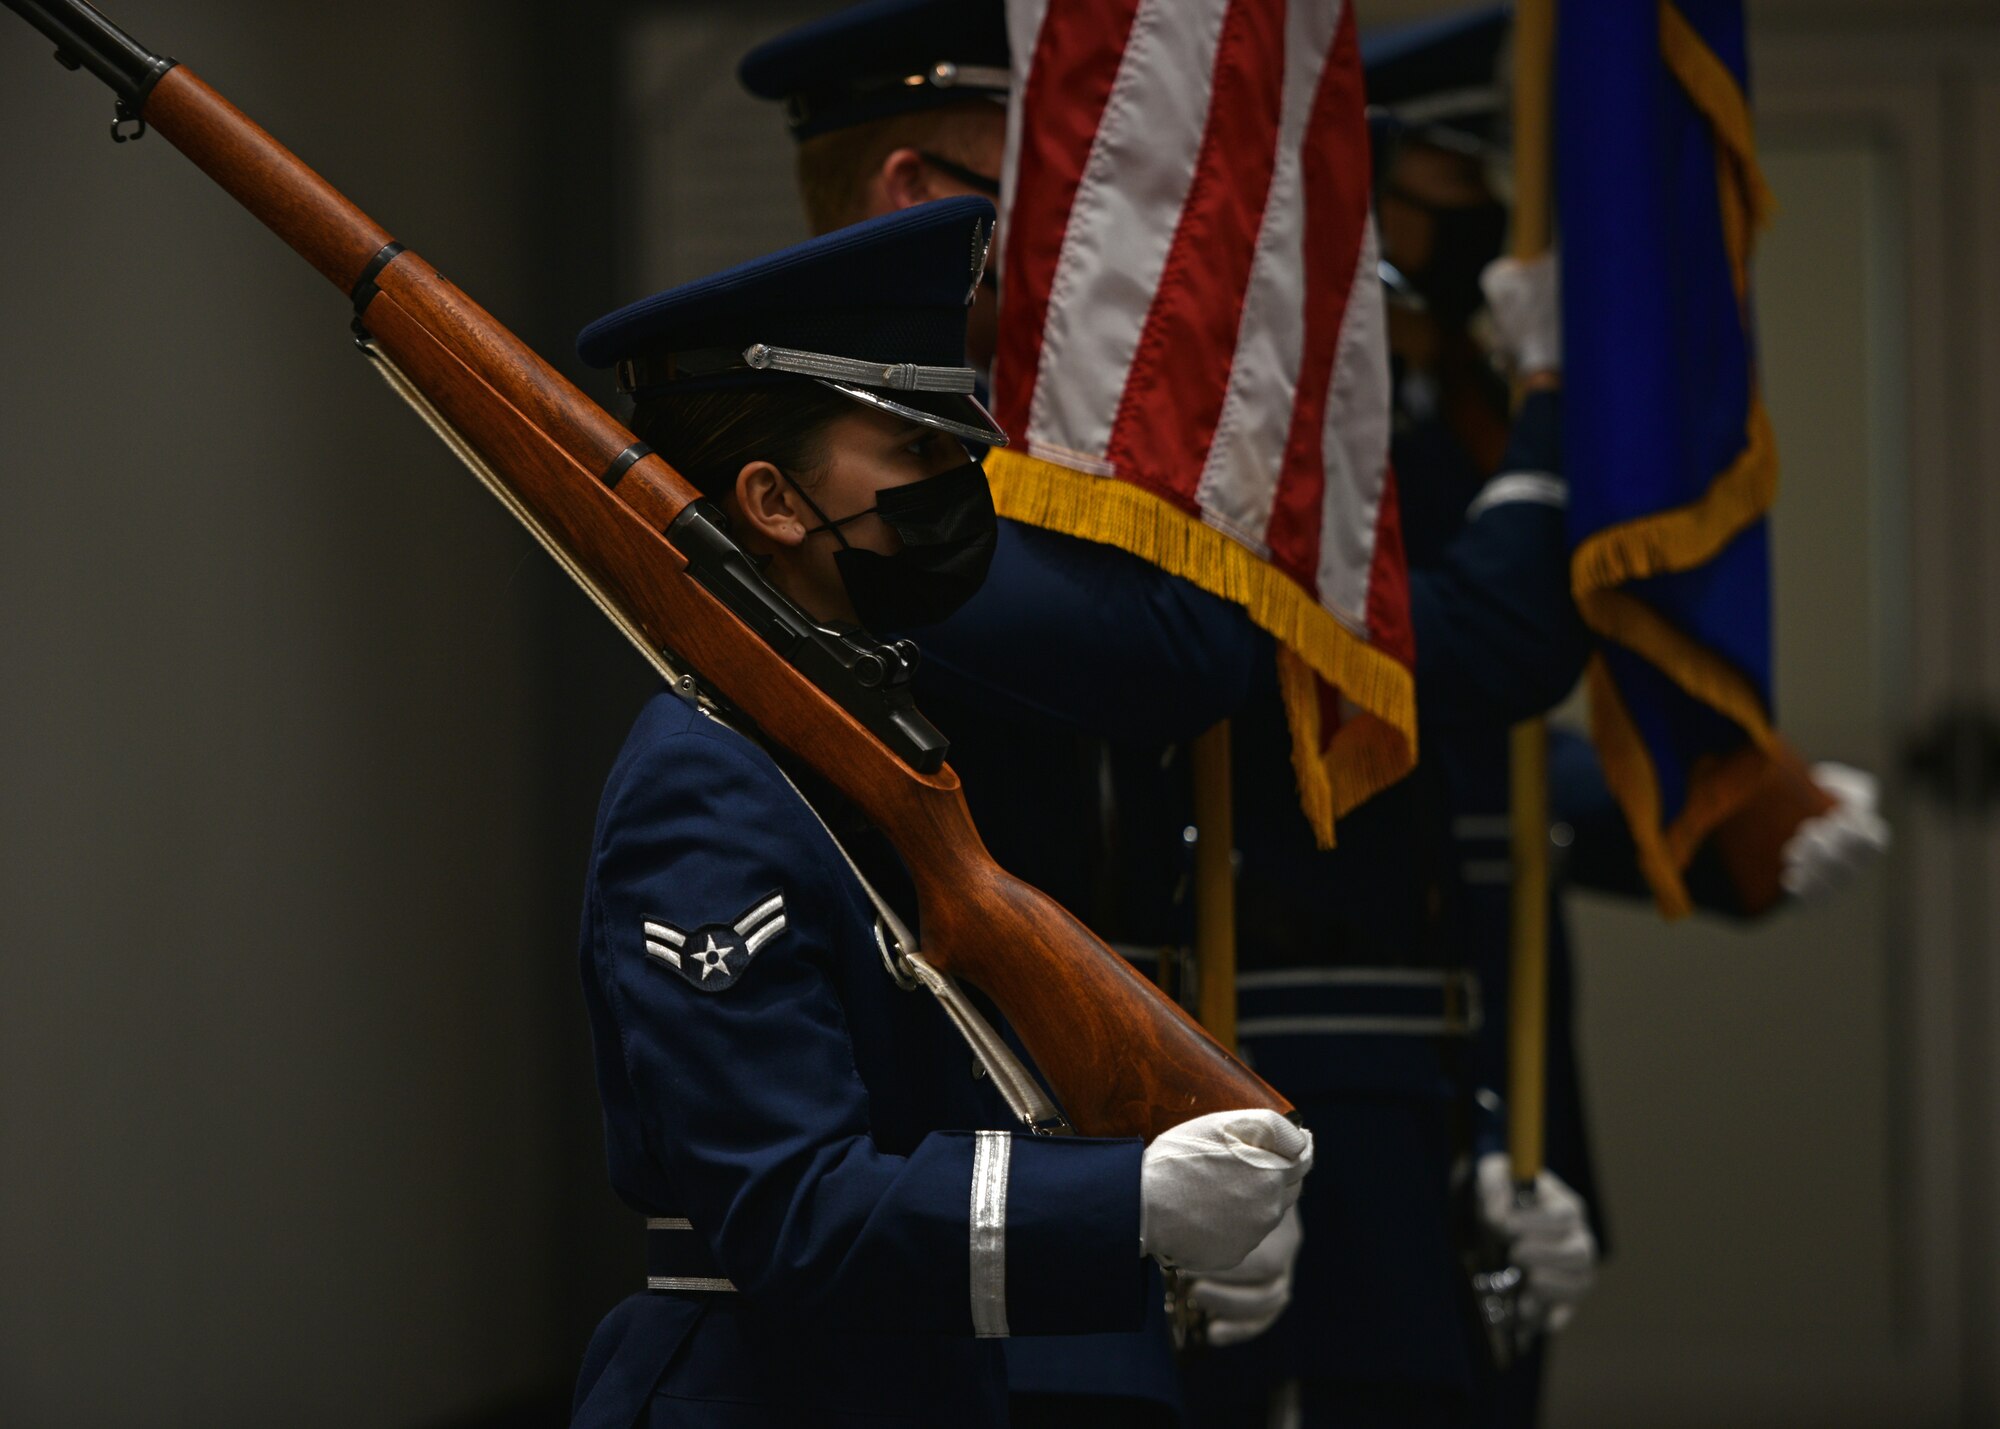 The Goodfellow Air Force Base Color Guard presents the U.S. National Colors during the Powell Event Center dedication ceremony on Goodfellow Air Force Base, Sept. 10, 2021. The primary purpose of the Color Guard is to present the National Colors during official ceremonies. (U.S. Air Force photo by Senior Airman Ashley Thrash)